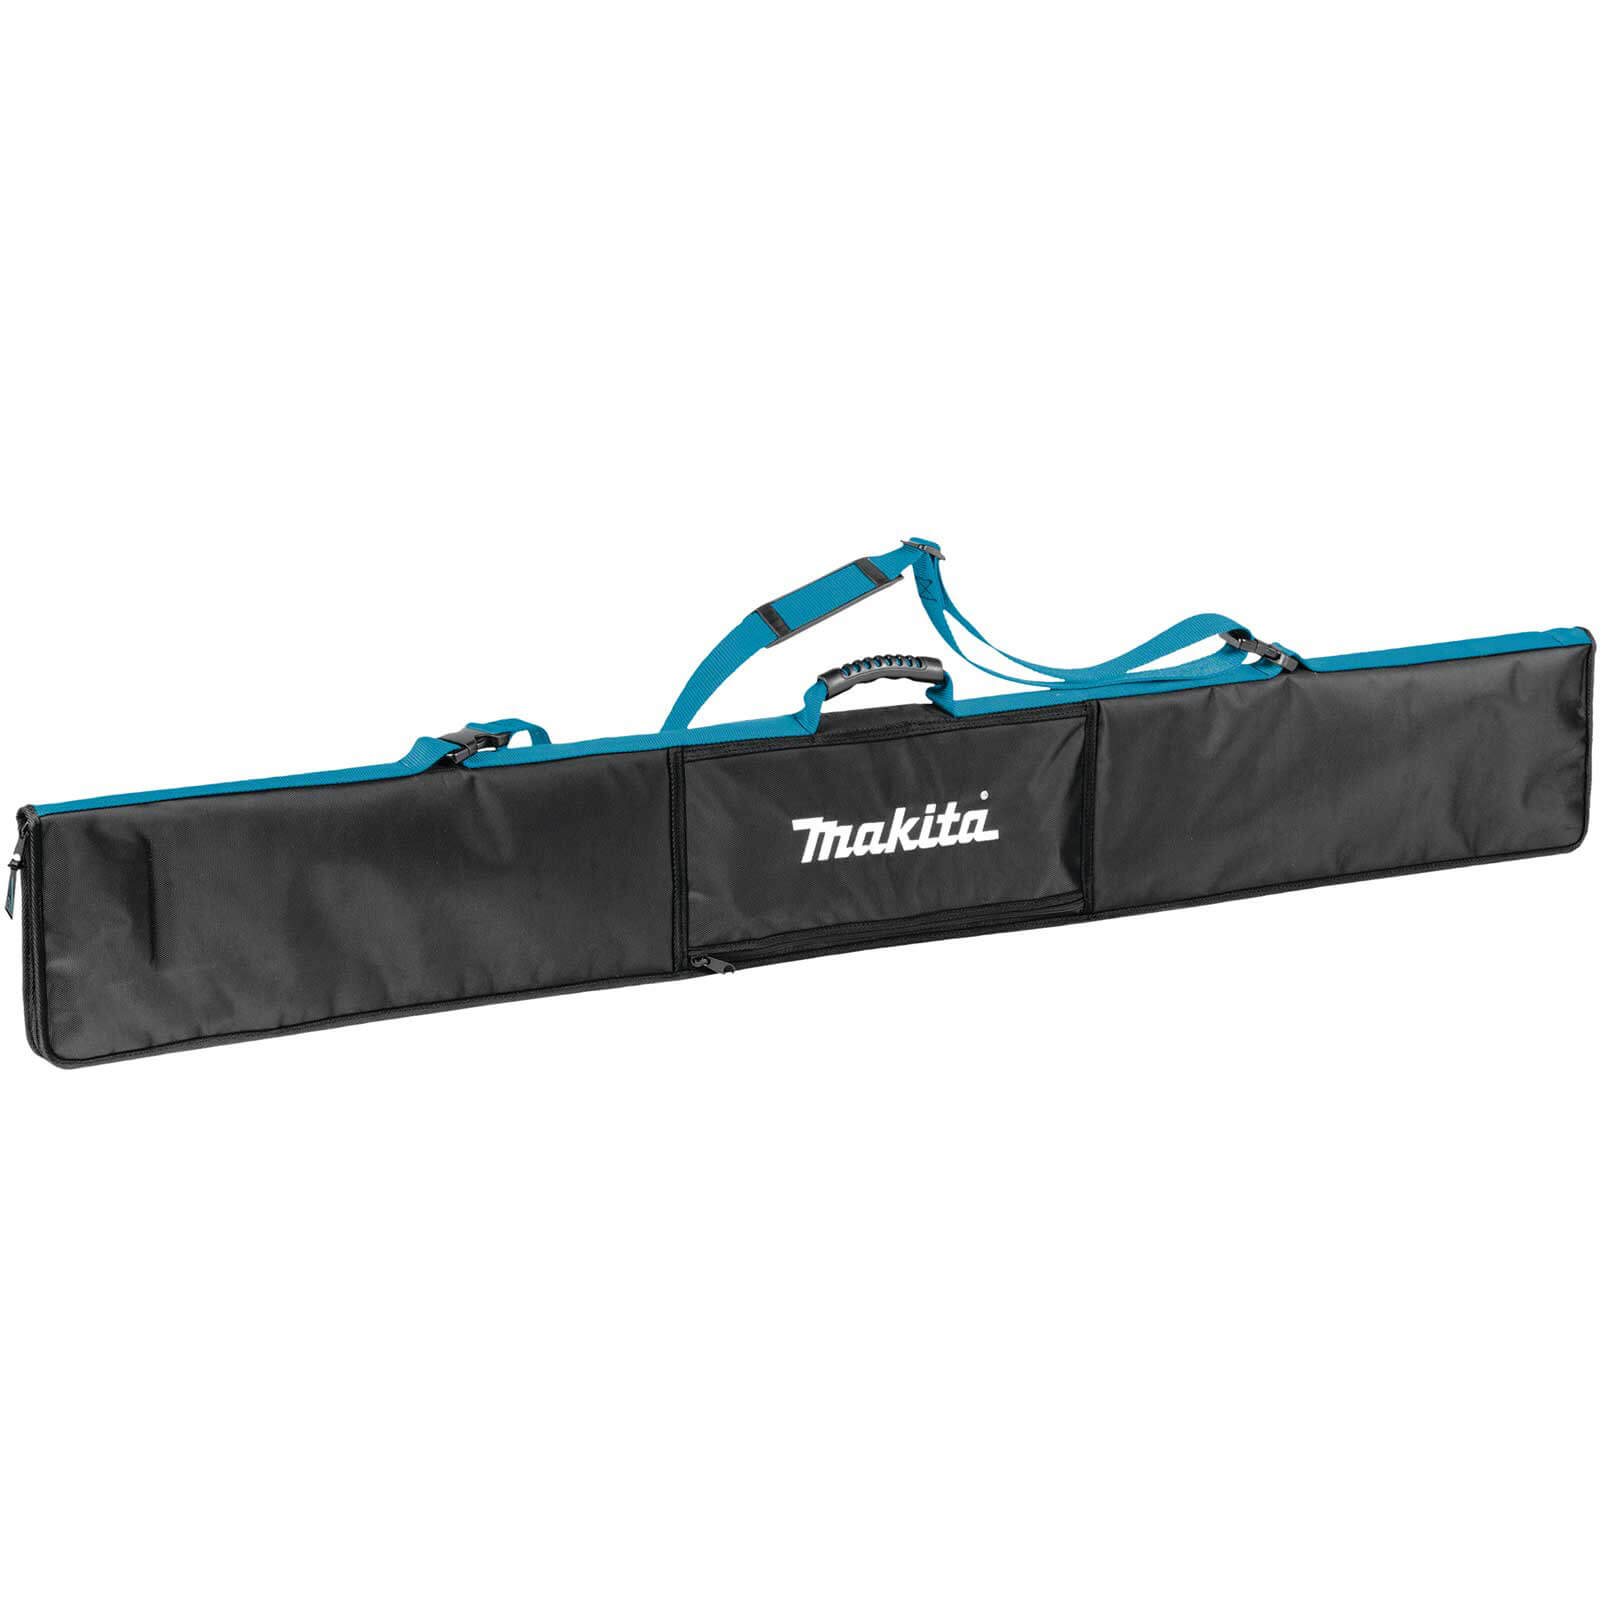 Image of Makita Plunge Saw Guide Rail Carry Bag 1500mm